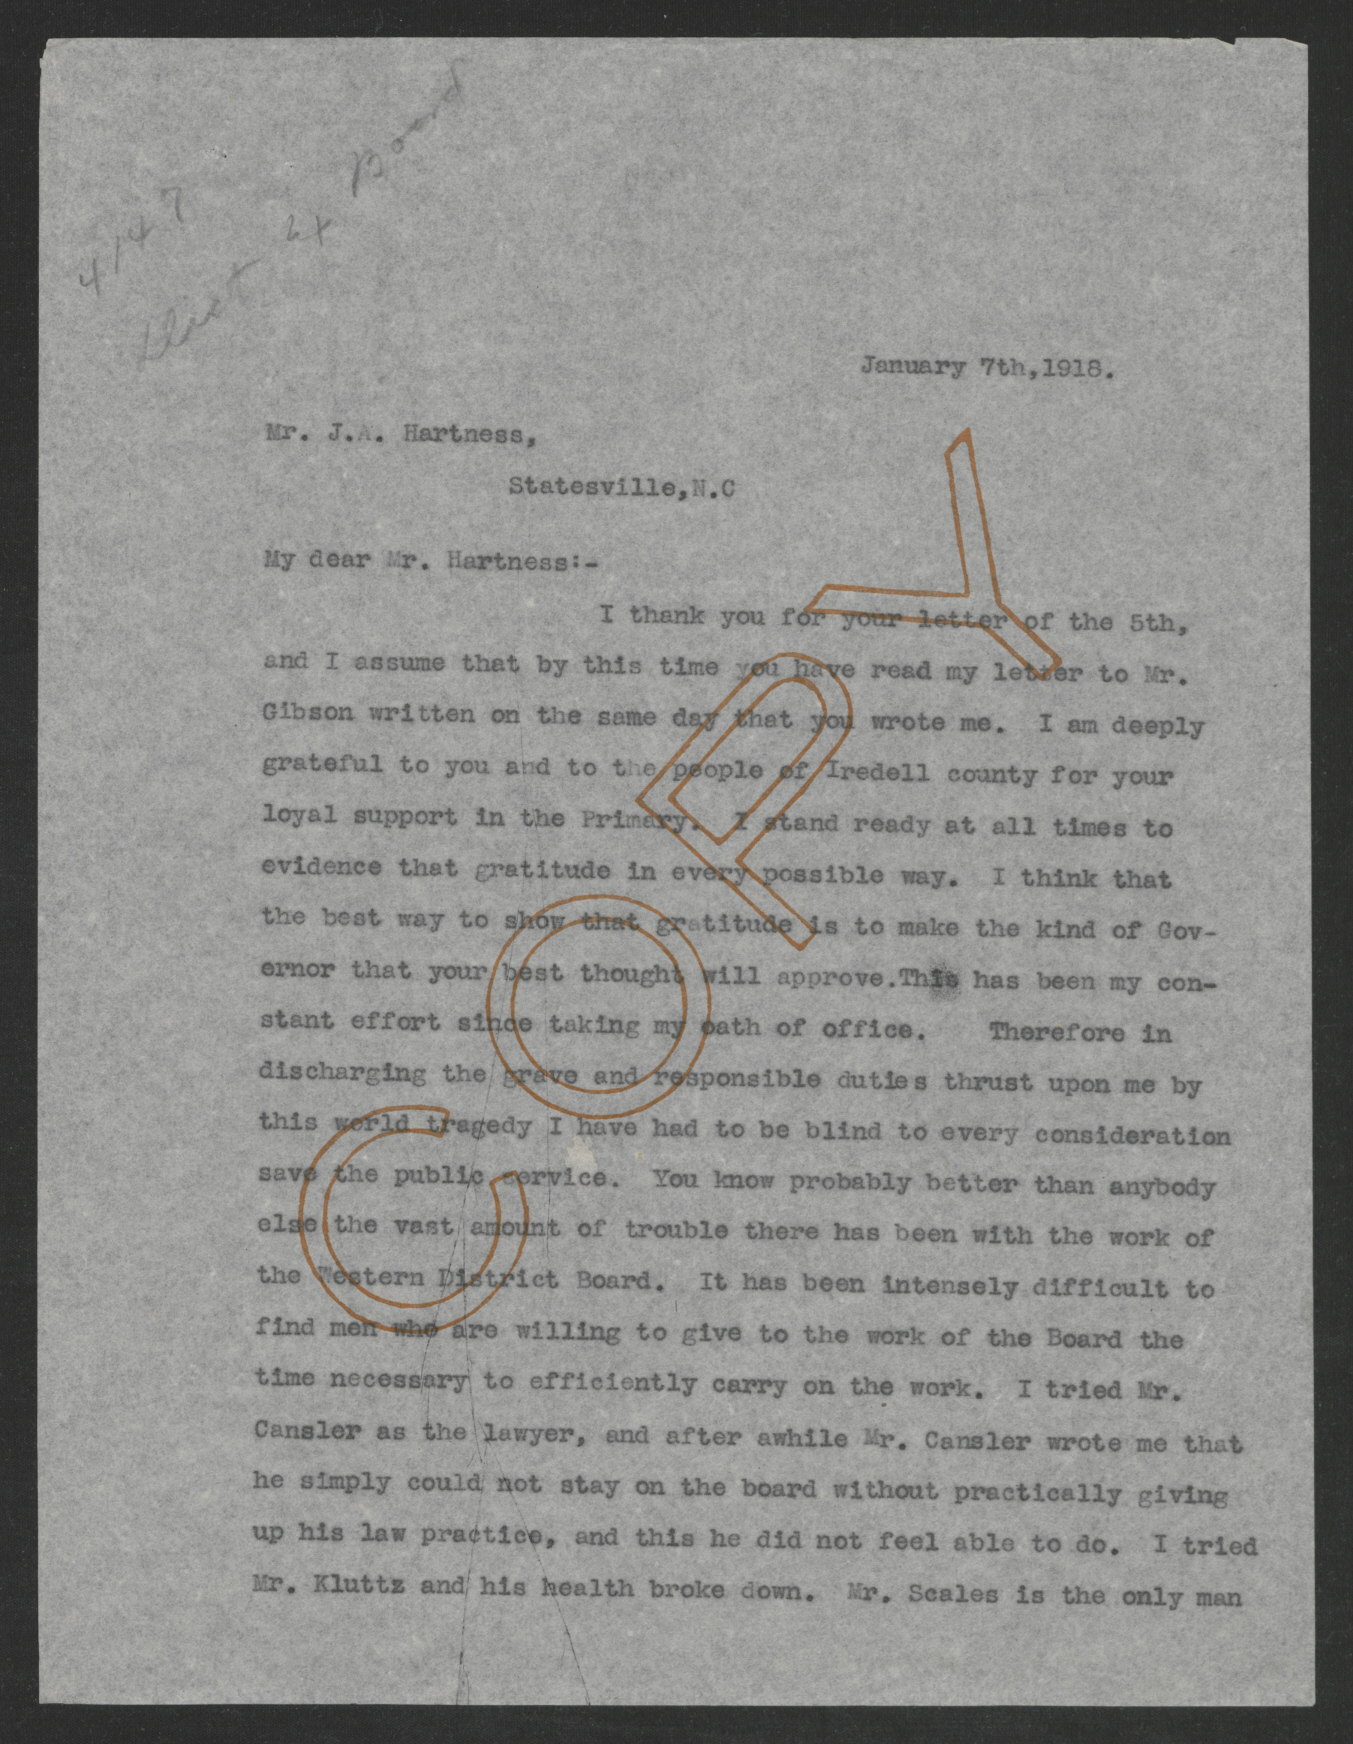 Letter from Thomas W. Bickett to James A. Hartness, January 7, 1918, page 1